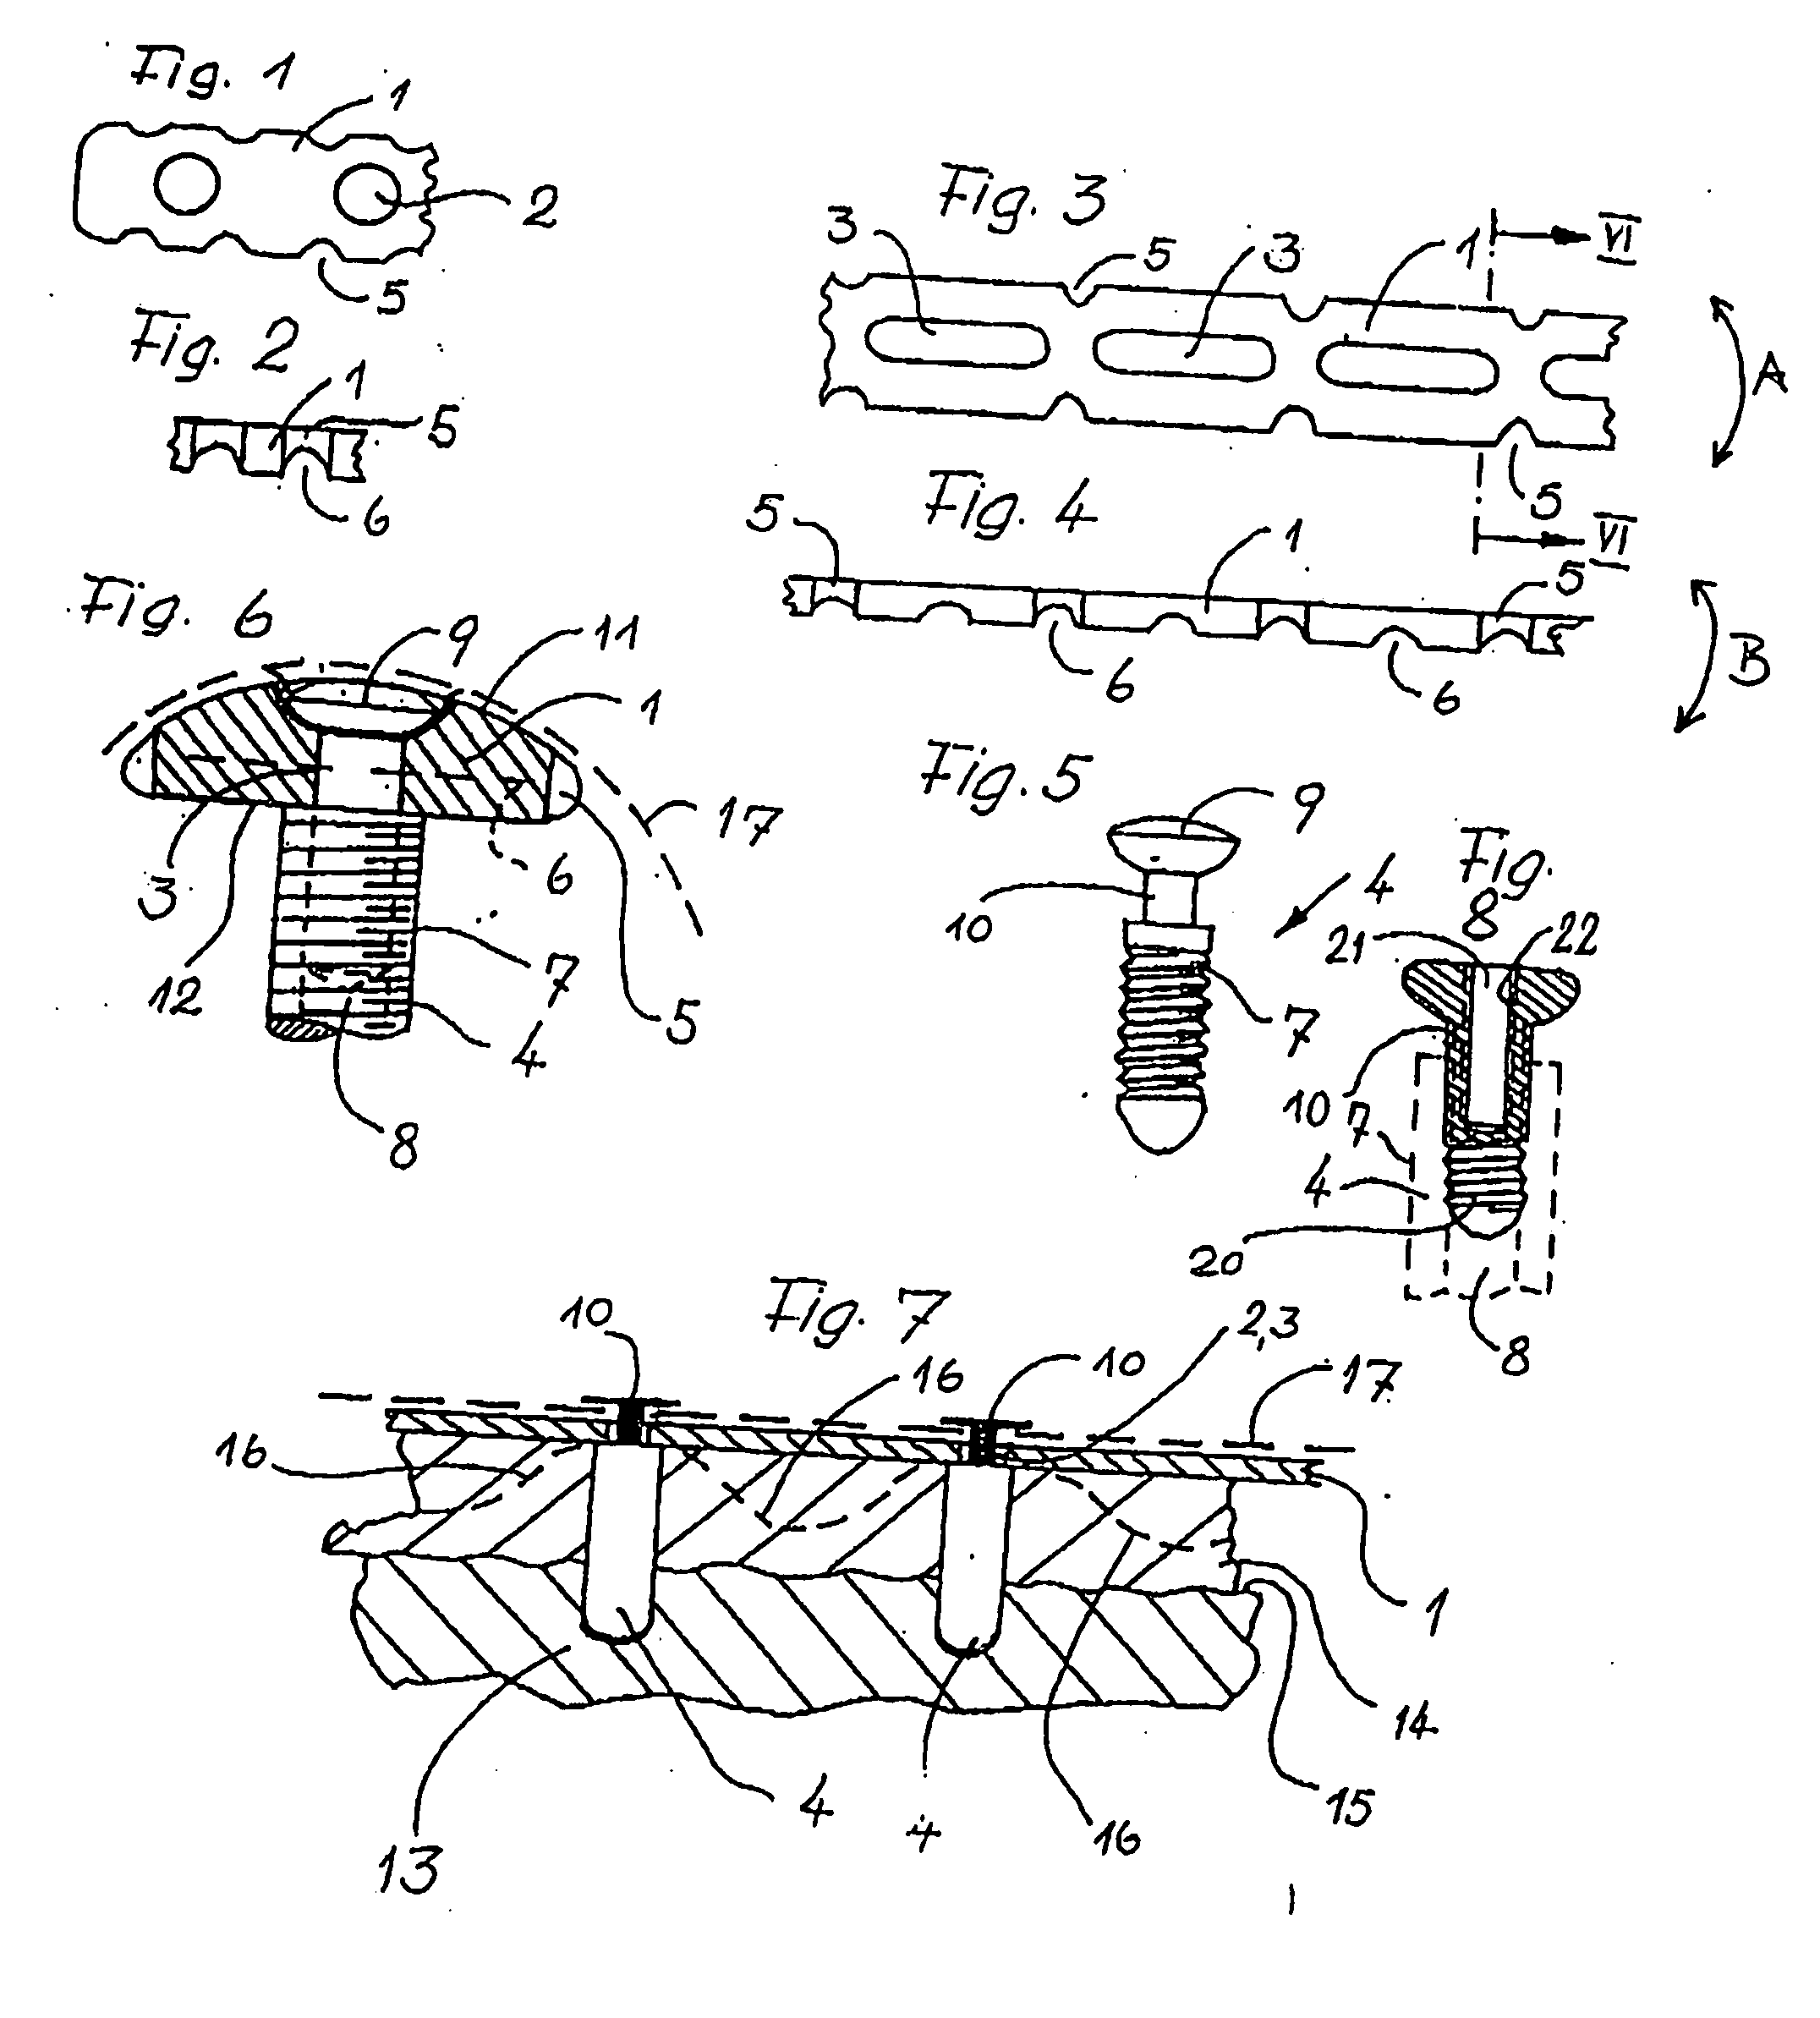 Device for regenerating, repairing, and modeling human and animal bone, especially in the jaw area for dental applications